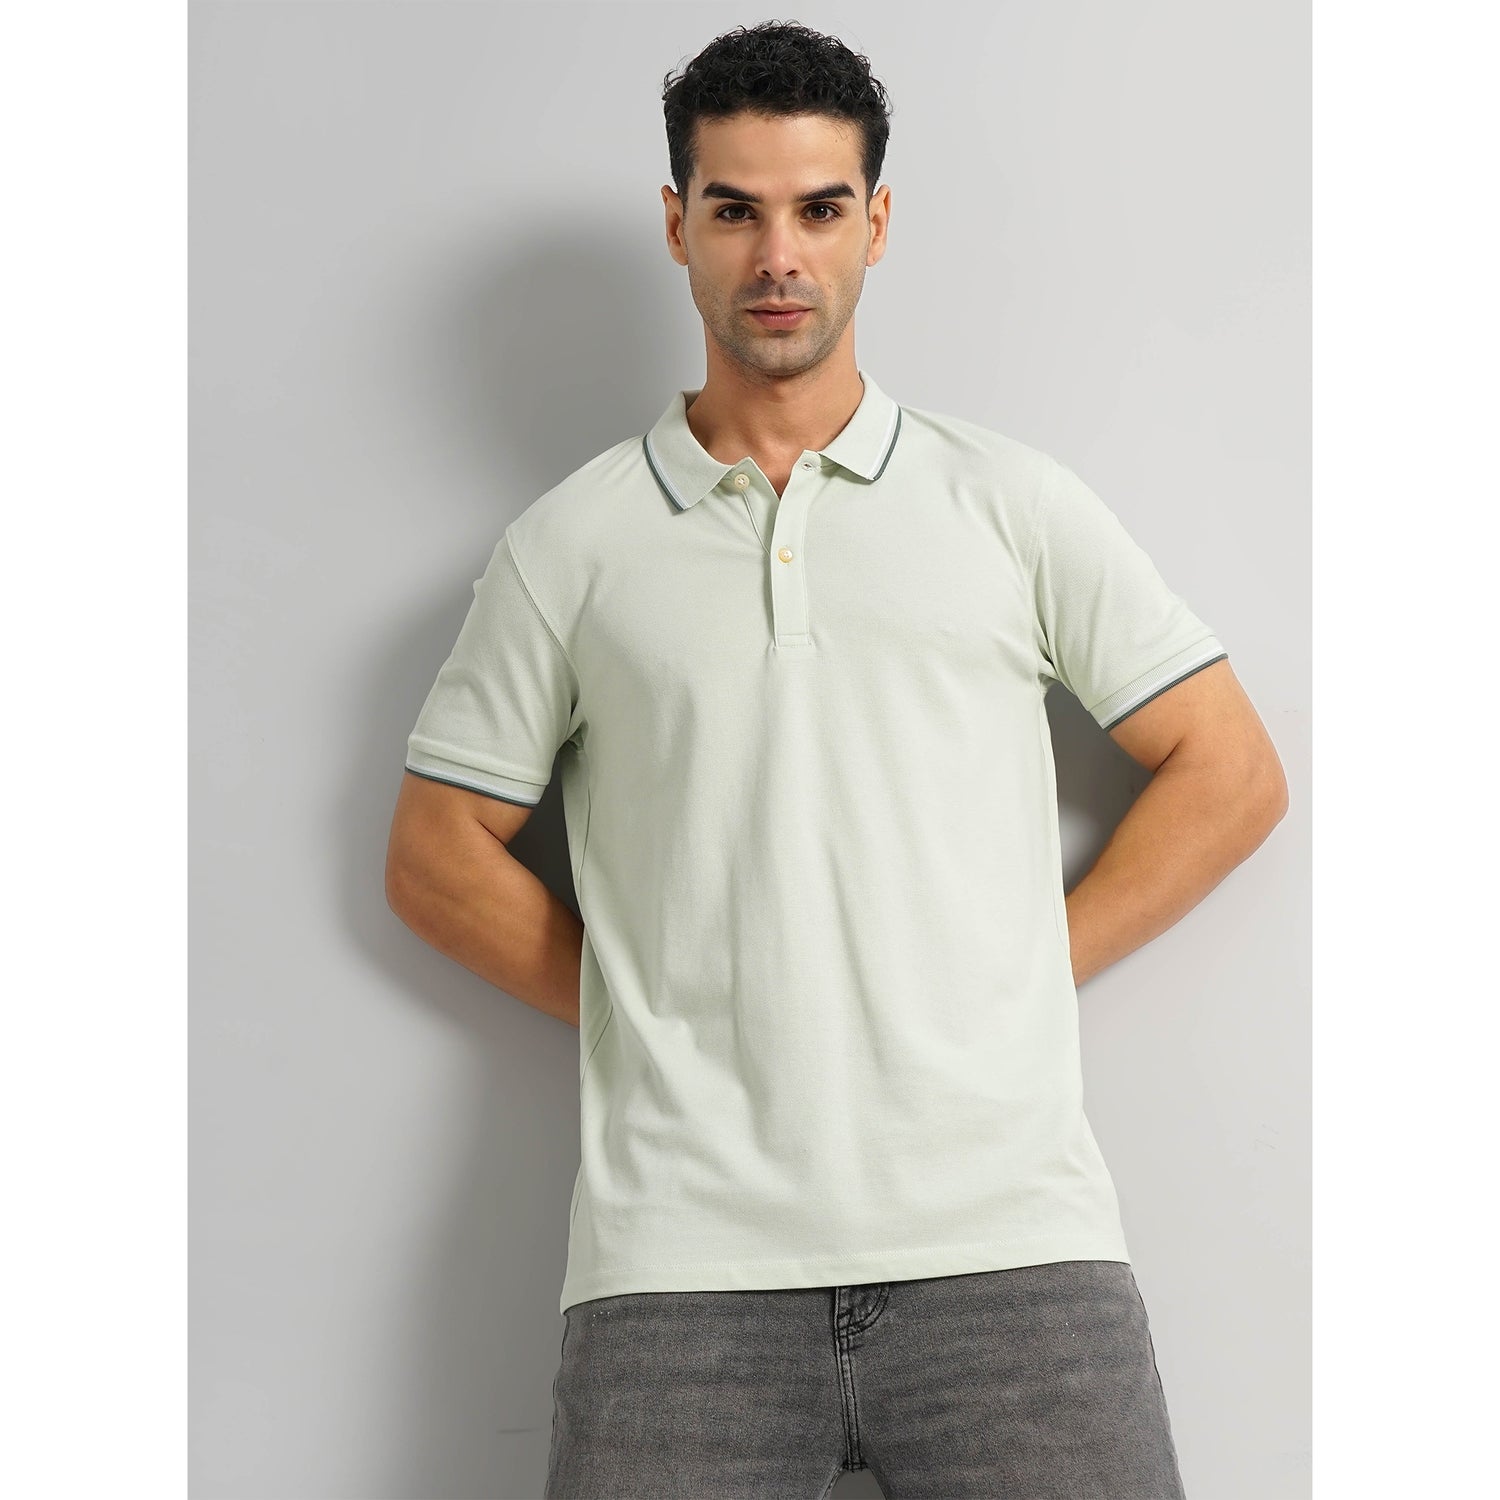 Men's Green Solid Slim Fit Cotton Polo with Tipping Tshirts (DECOLRAYEB3)